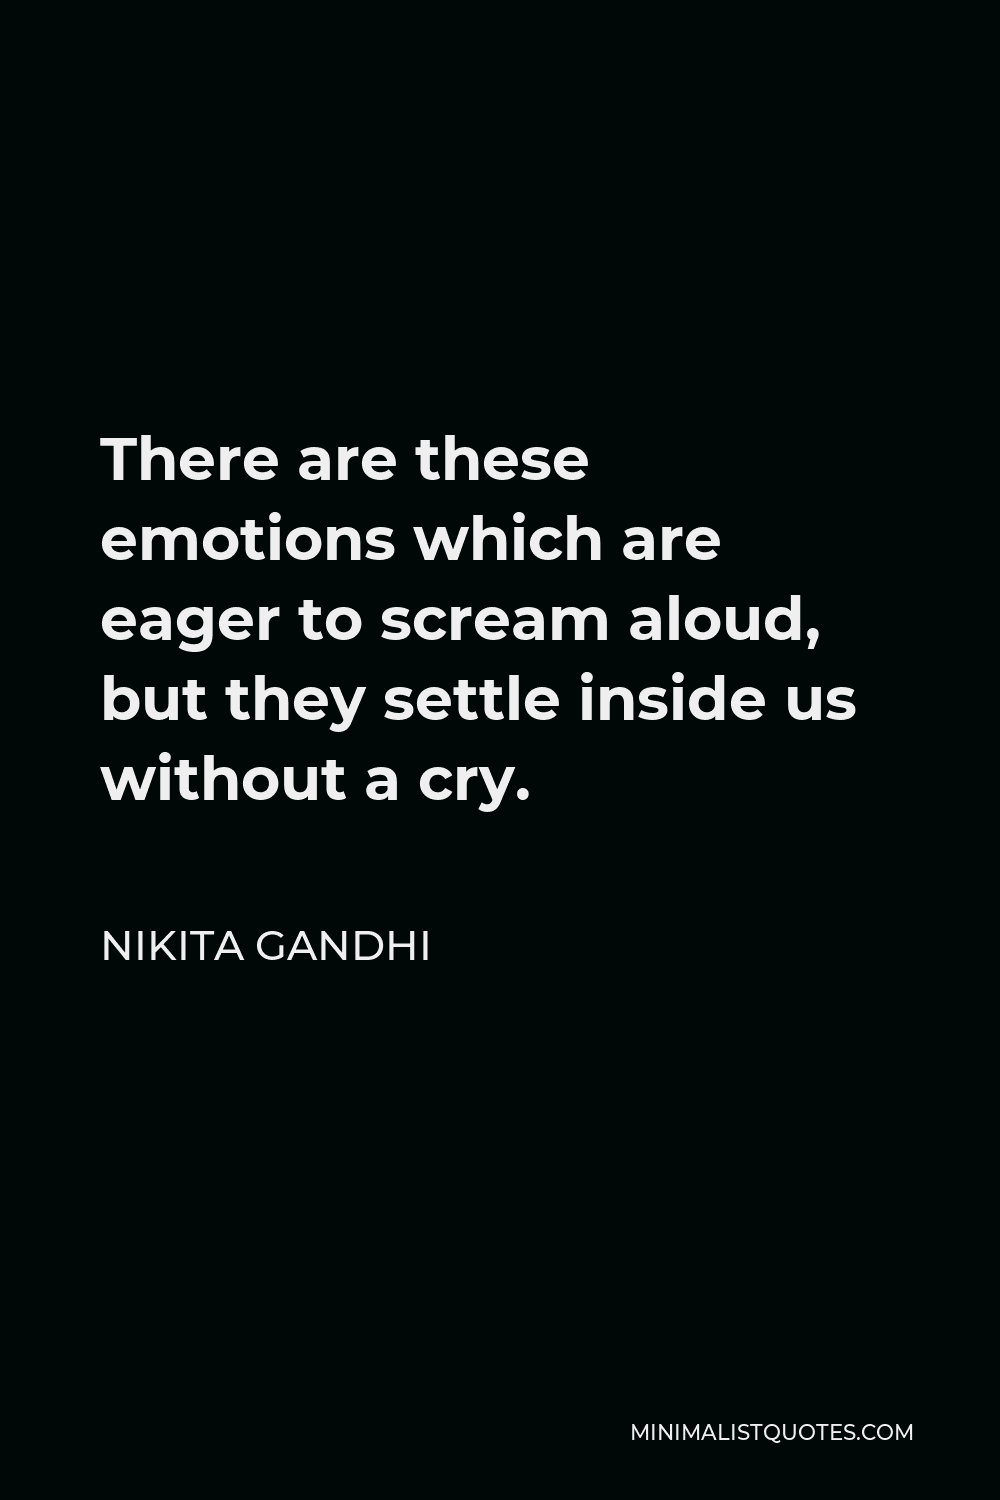 Nikita Gandhi Quote - There are these emotions which are eager to scream aloud, but they settle inside us without a cry.